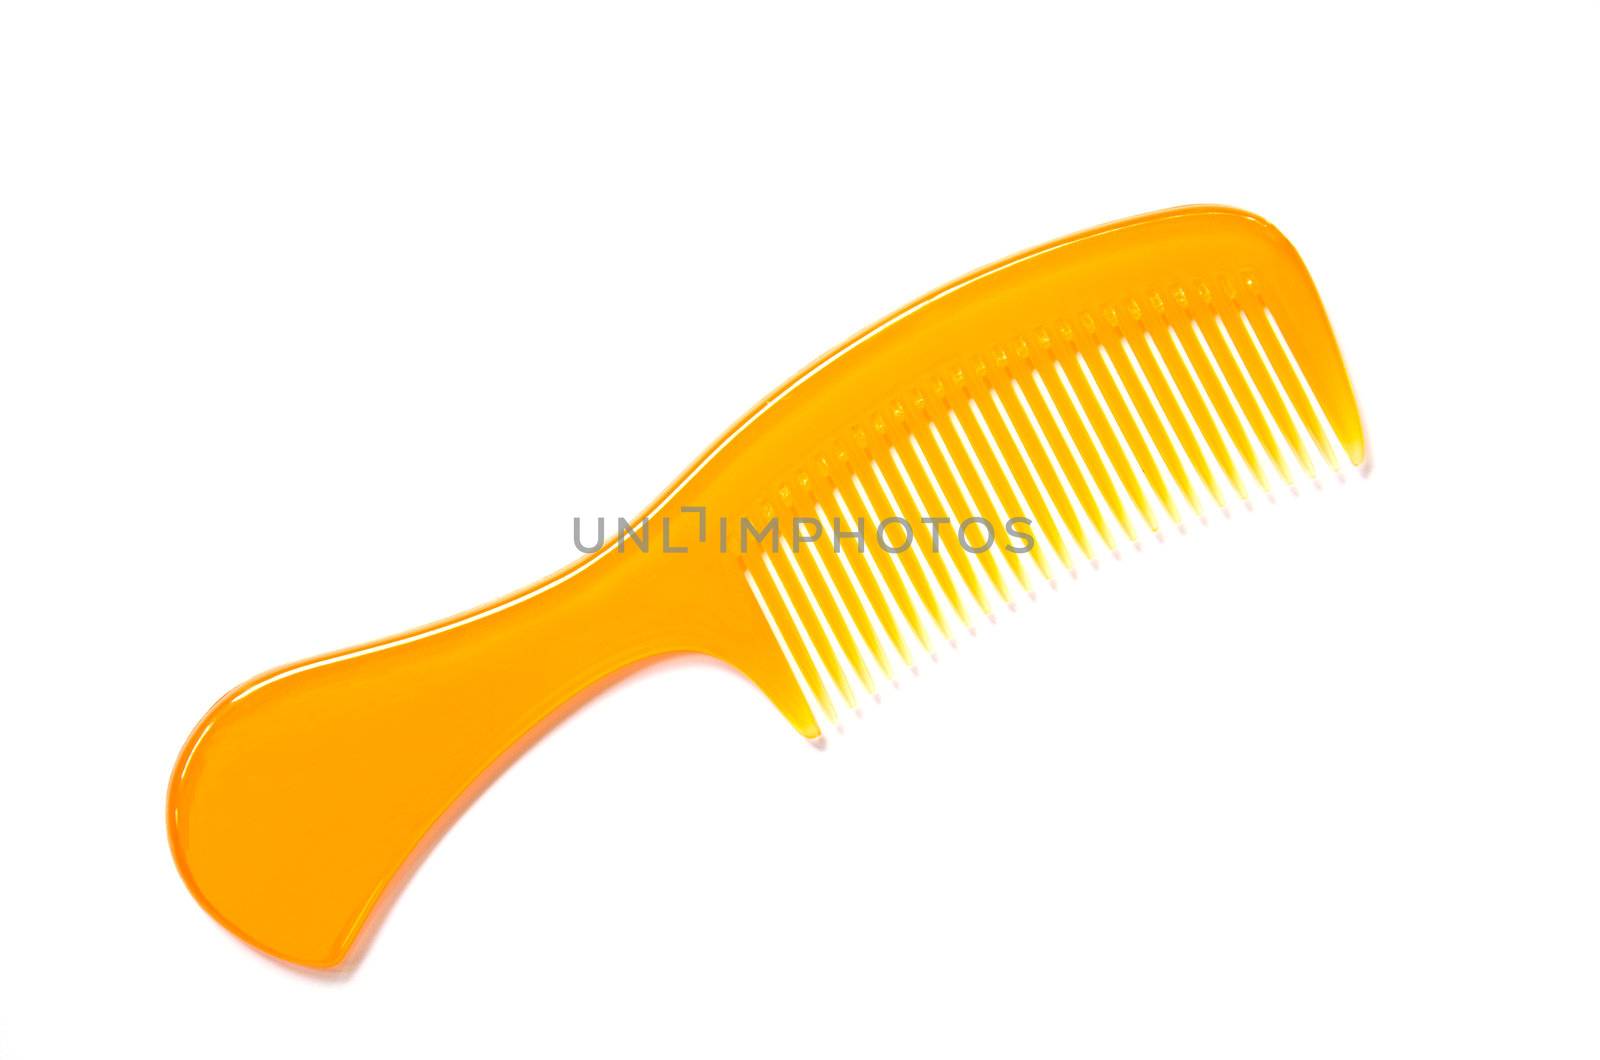 Comb is an accessories for styling hair